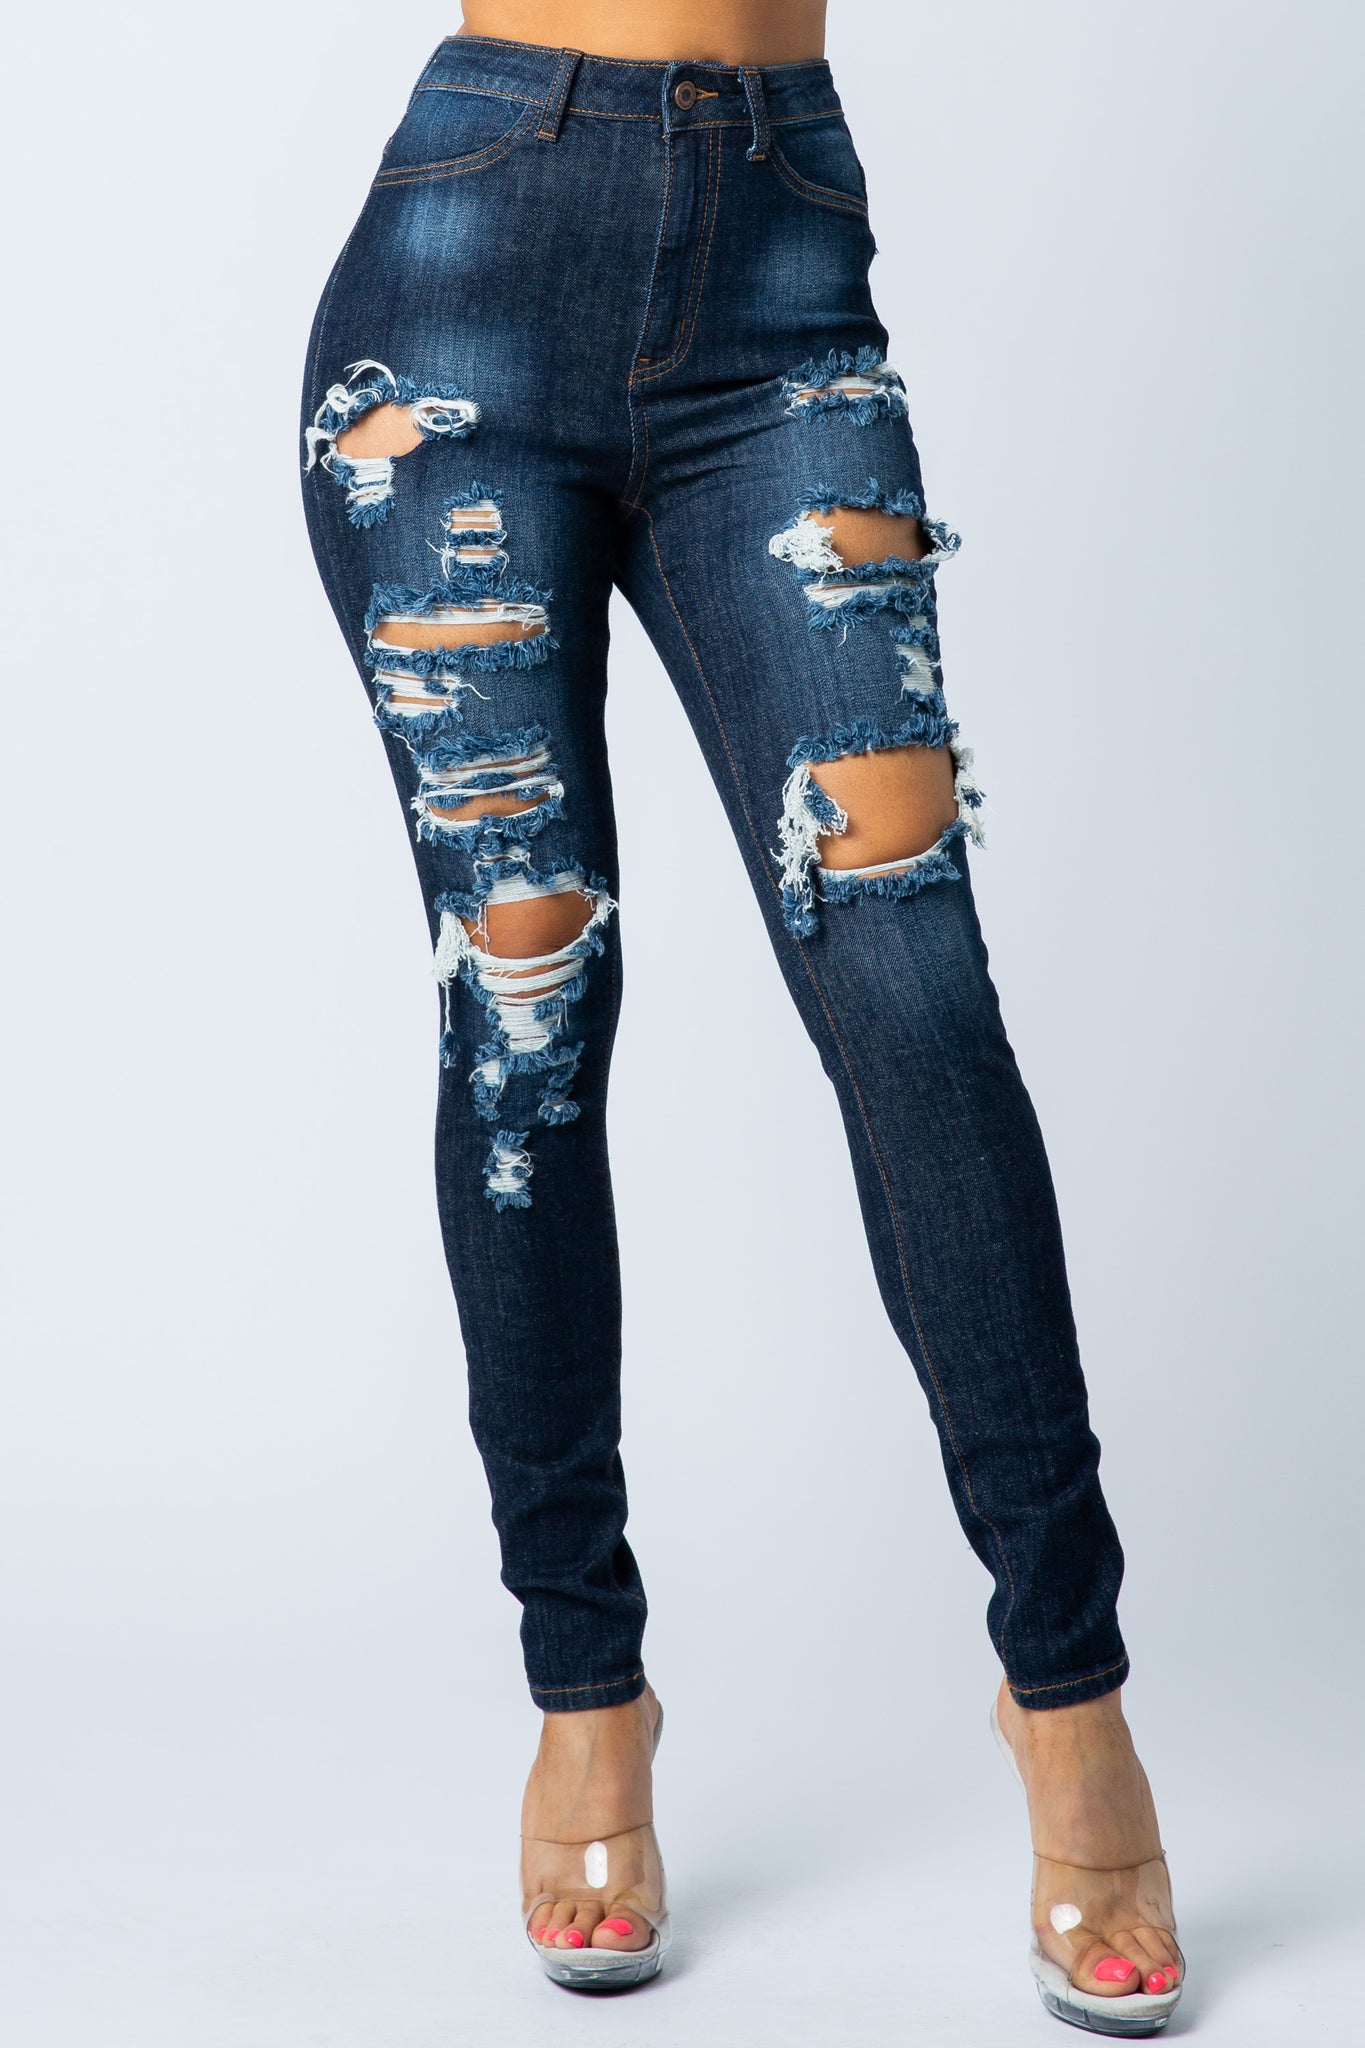 RAVEN Moto - Motorcycle Jeans | Women's High-Waisted REVOLT Ripped Armored  Jeans